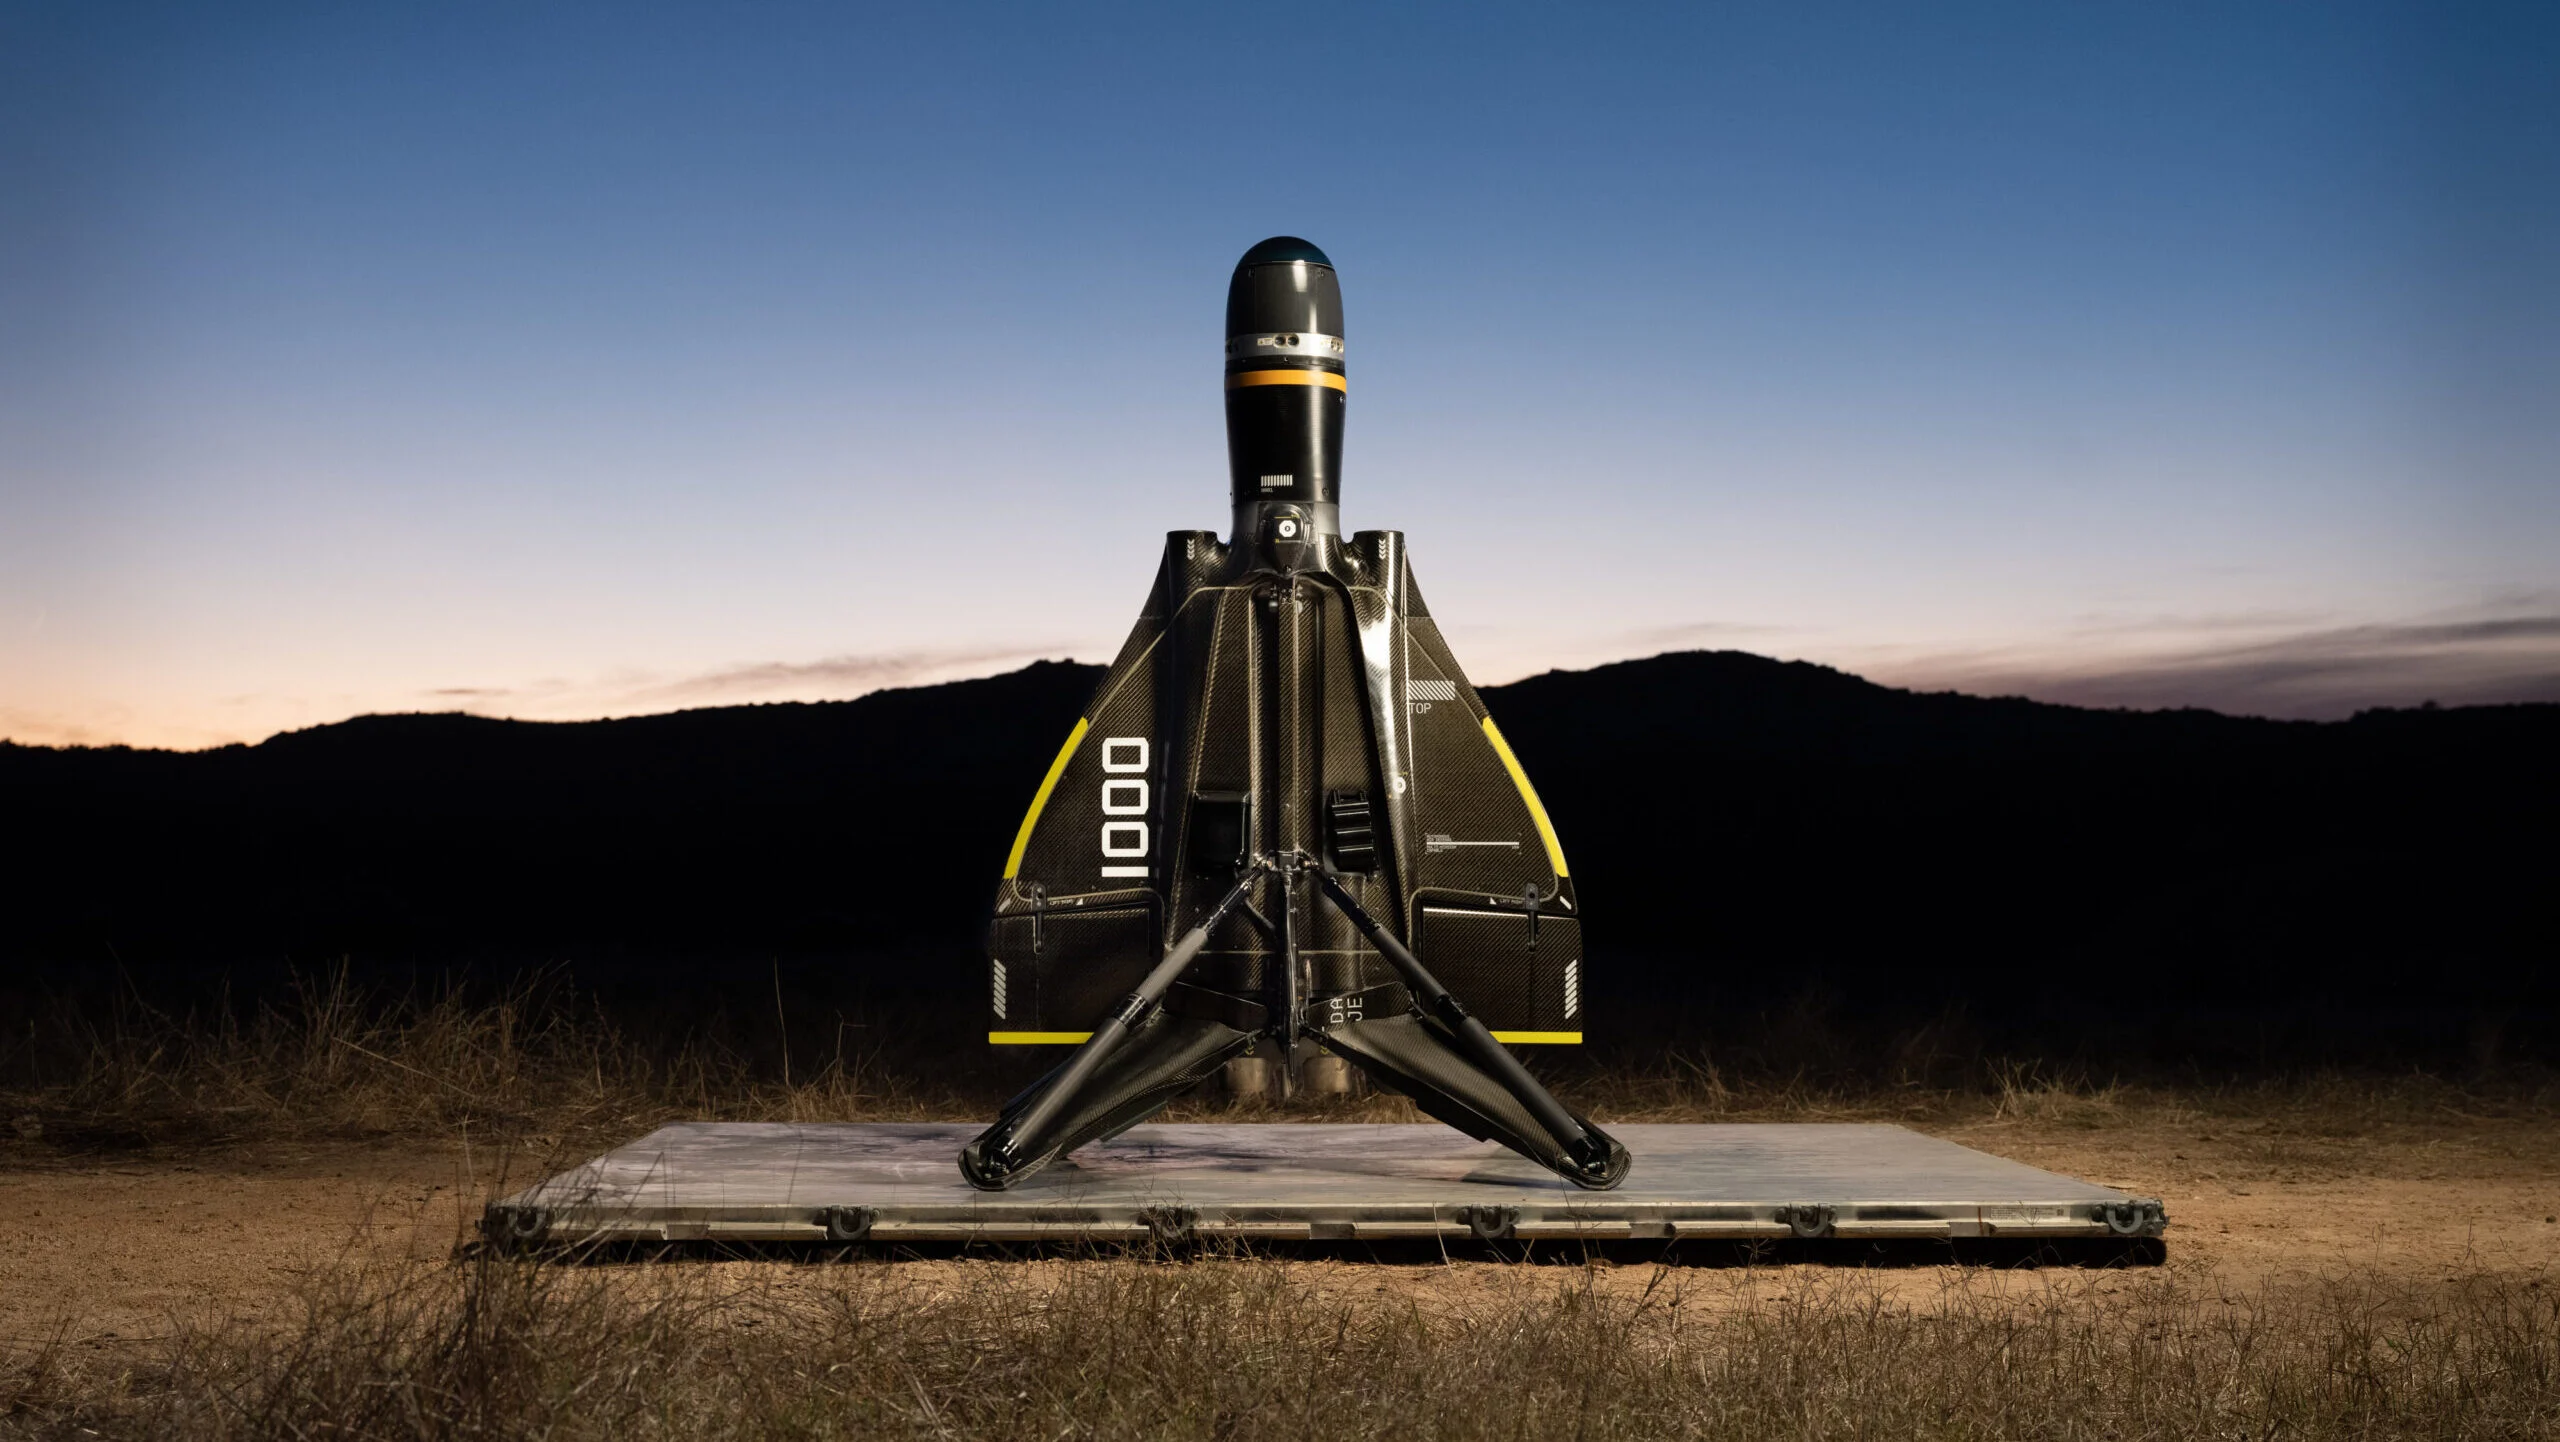 Anduril unveils VTOL Roadrunner-Munition for aerial defense, one US customer buying in